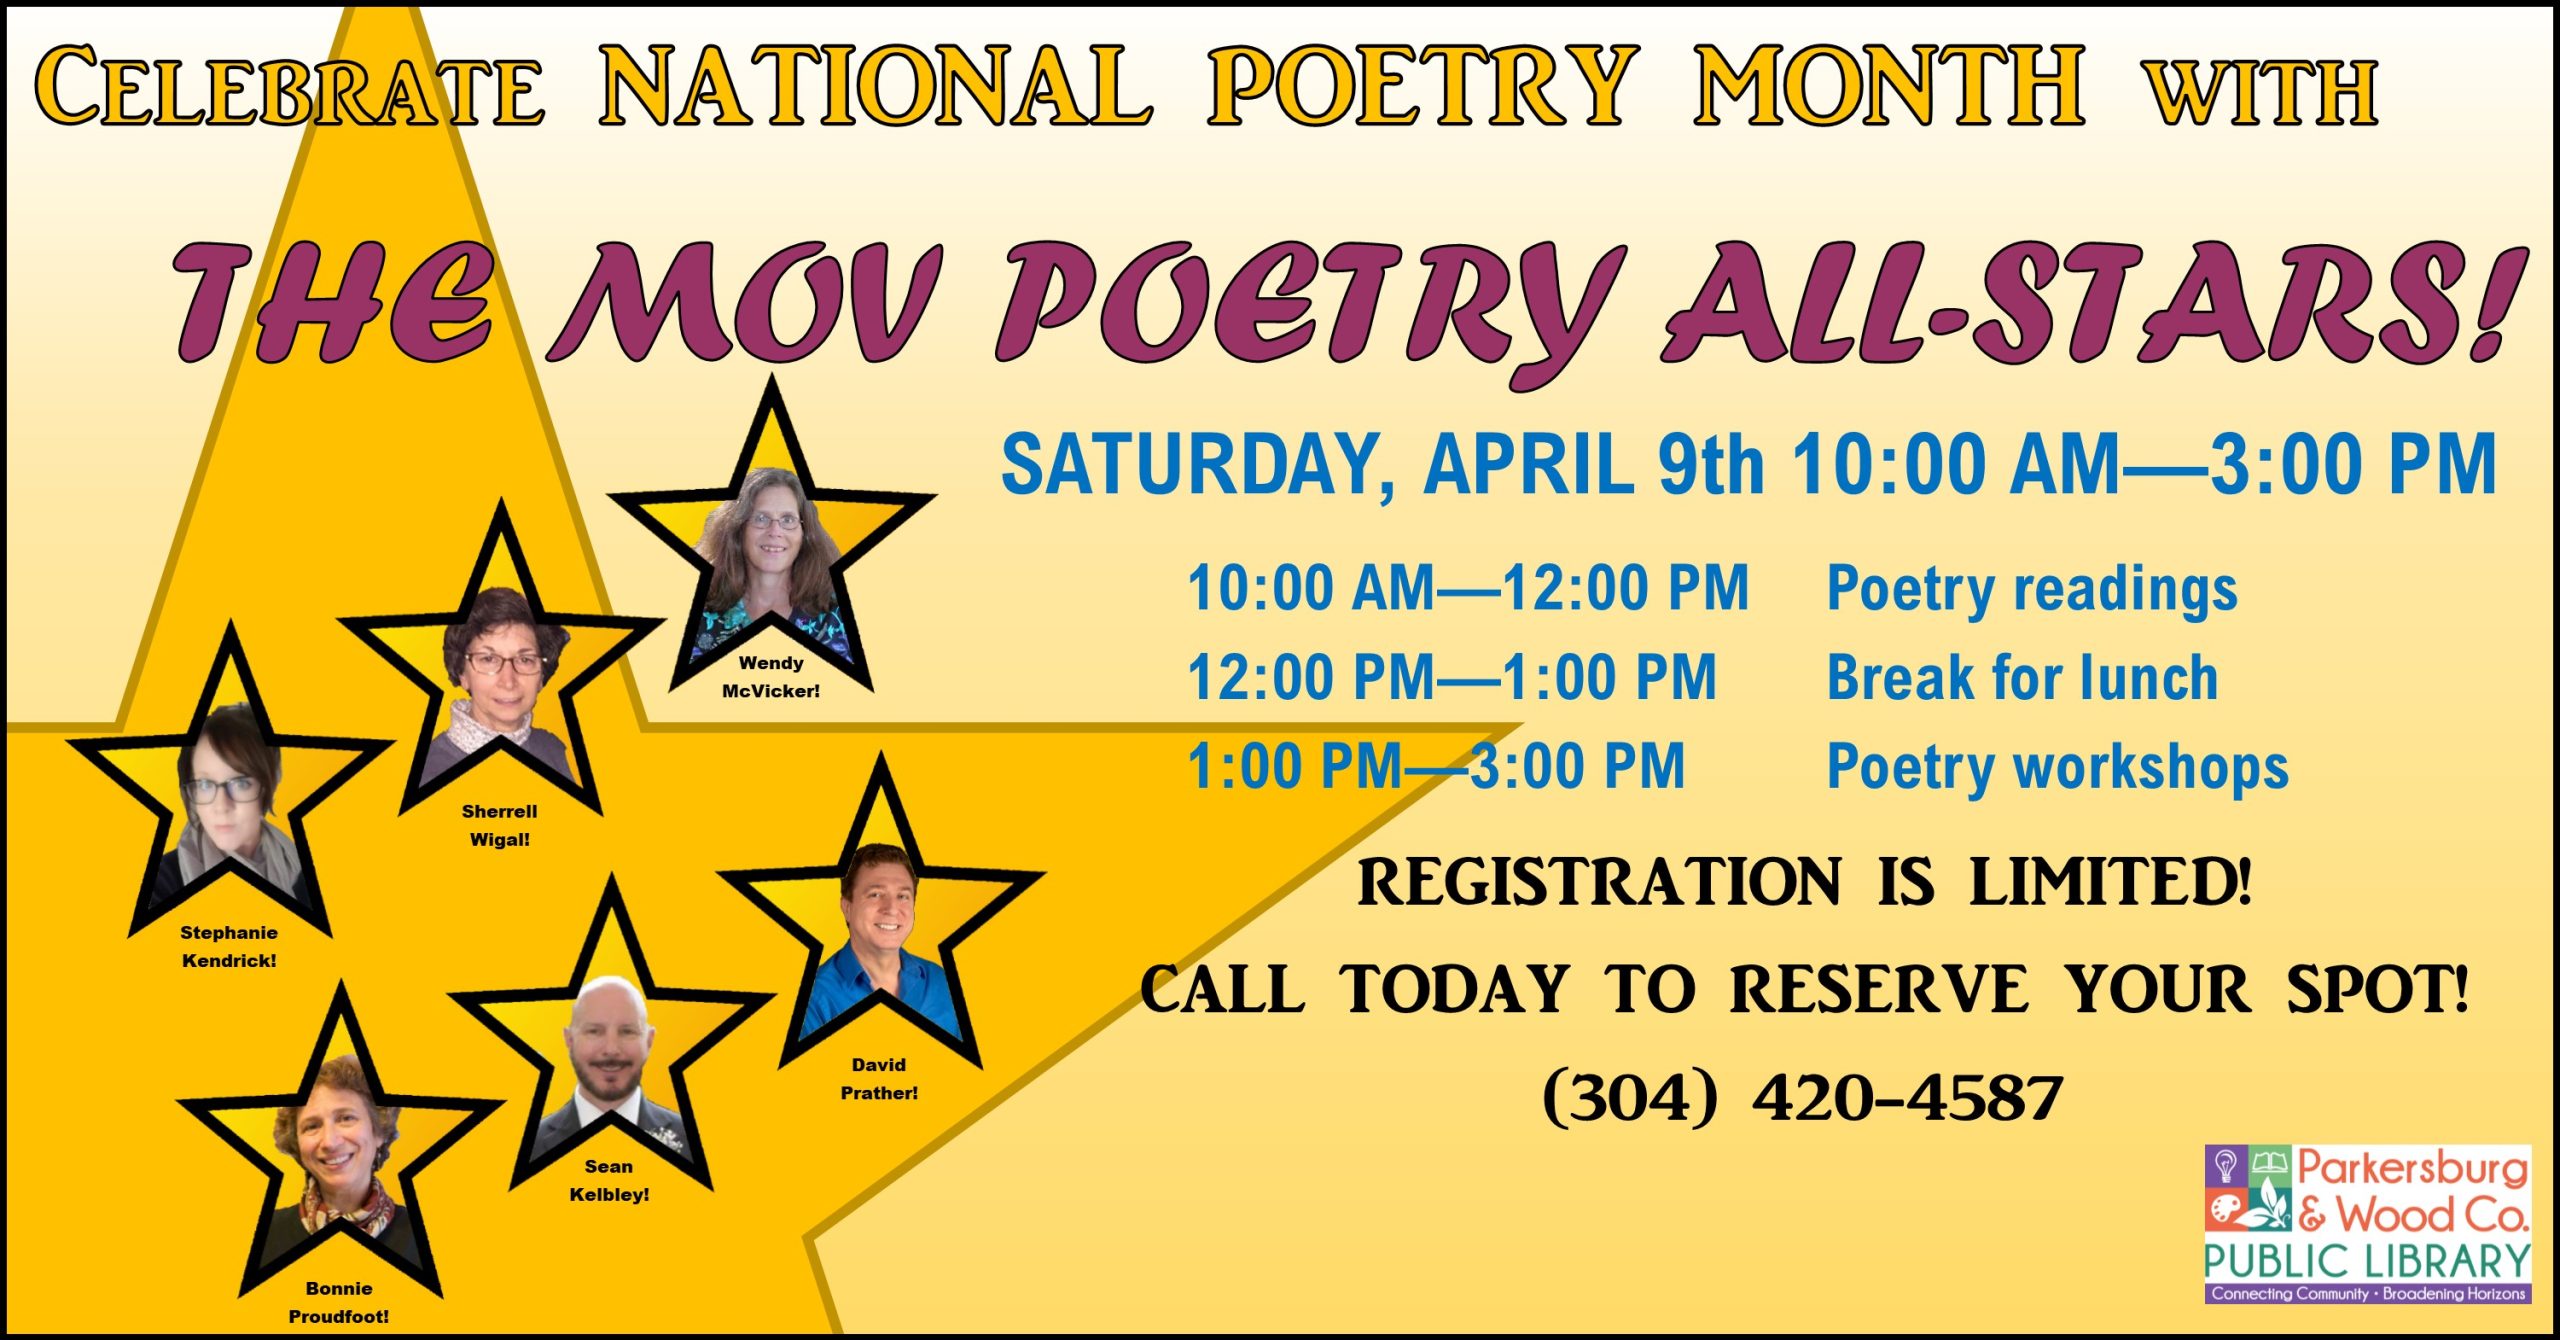 MOV Poetry All Stars! Conference at Emerson